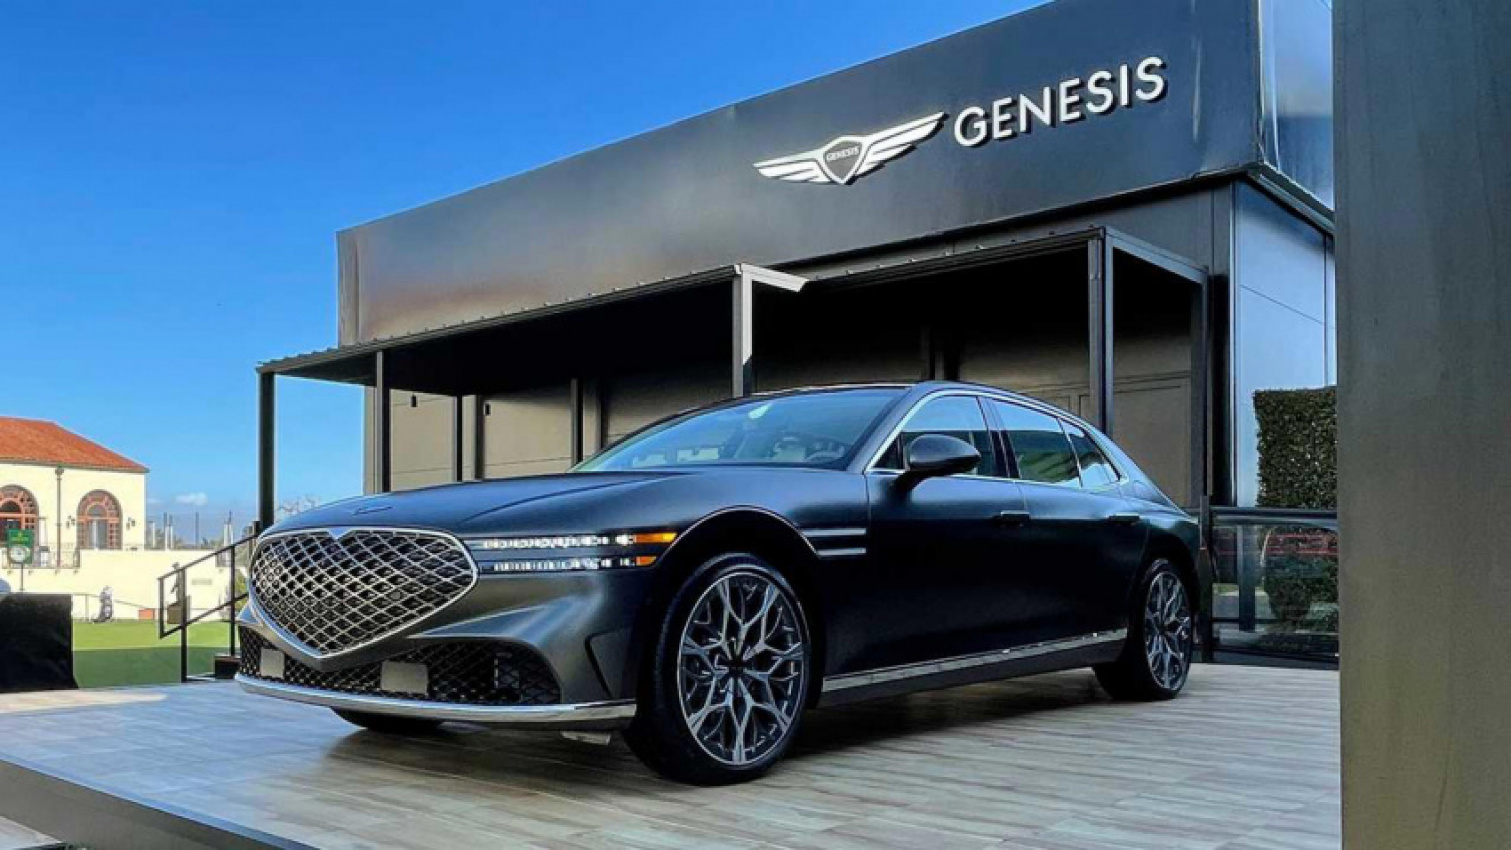 autos, cars, genesis, genesis g90, video: we check out the 2023 genesis g90 up close